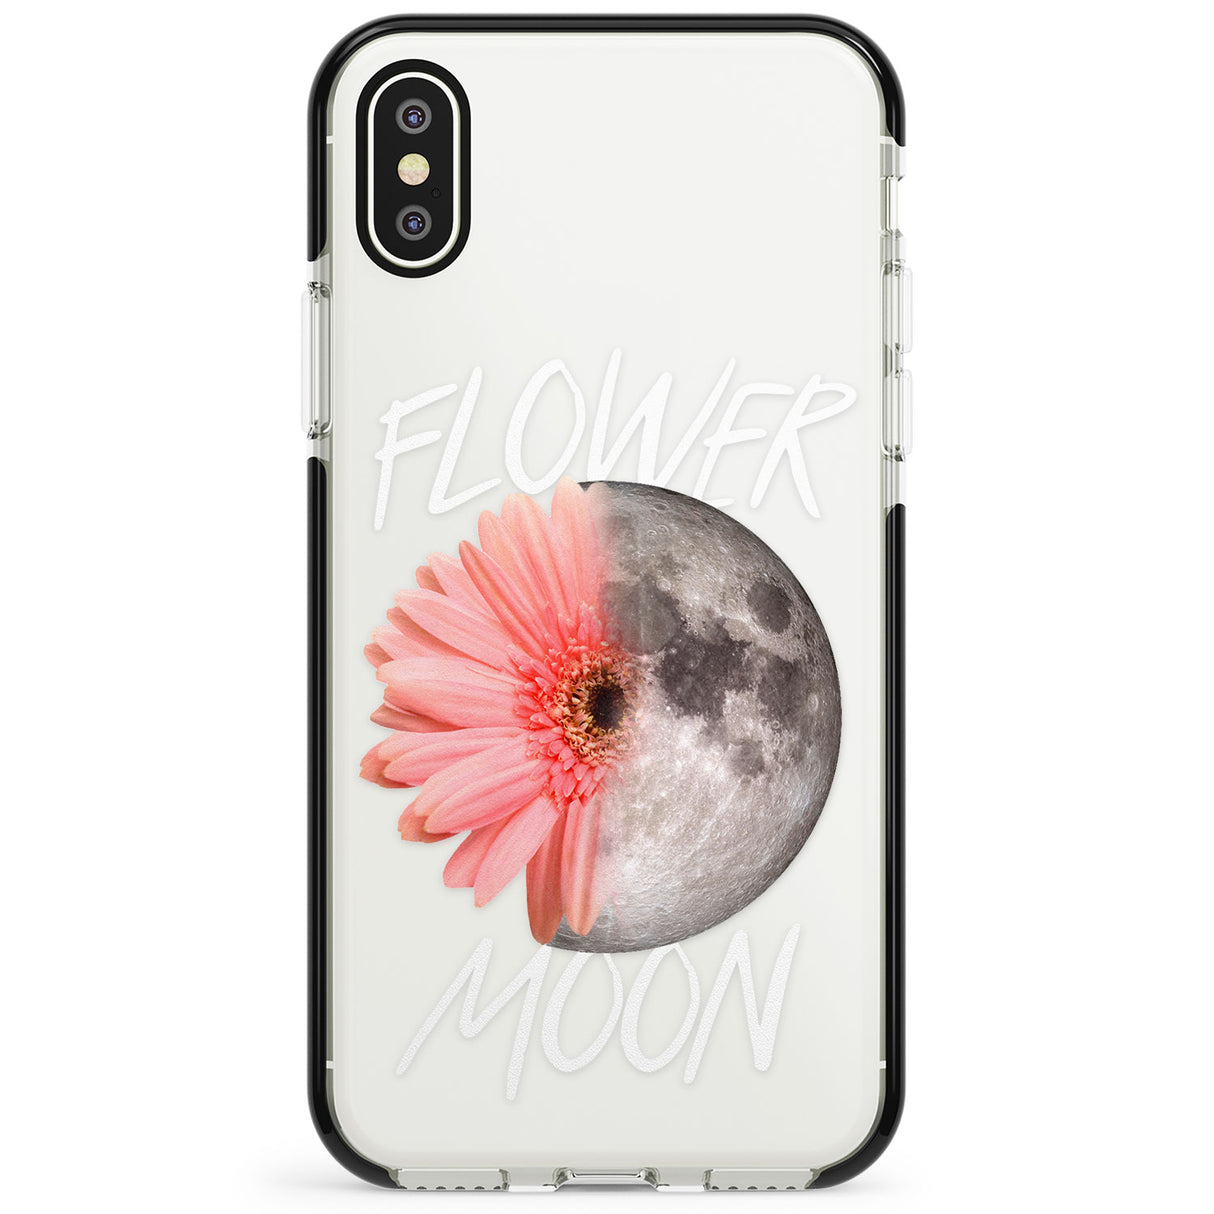 Flower Moon Phone Case for iPhone X XS Max XR